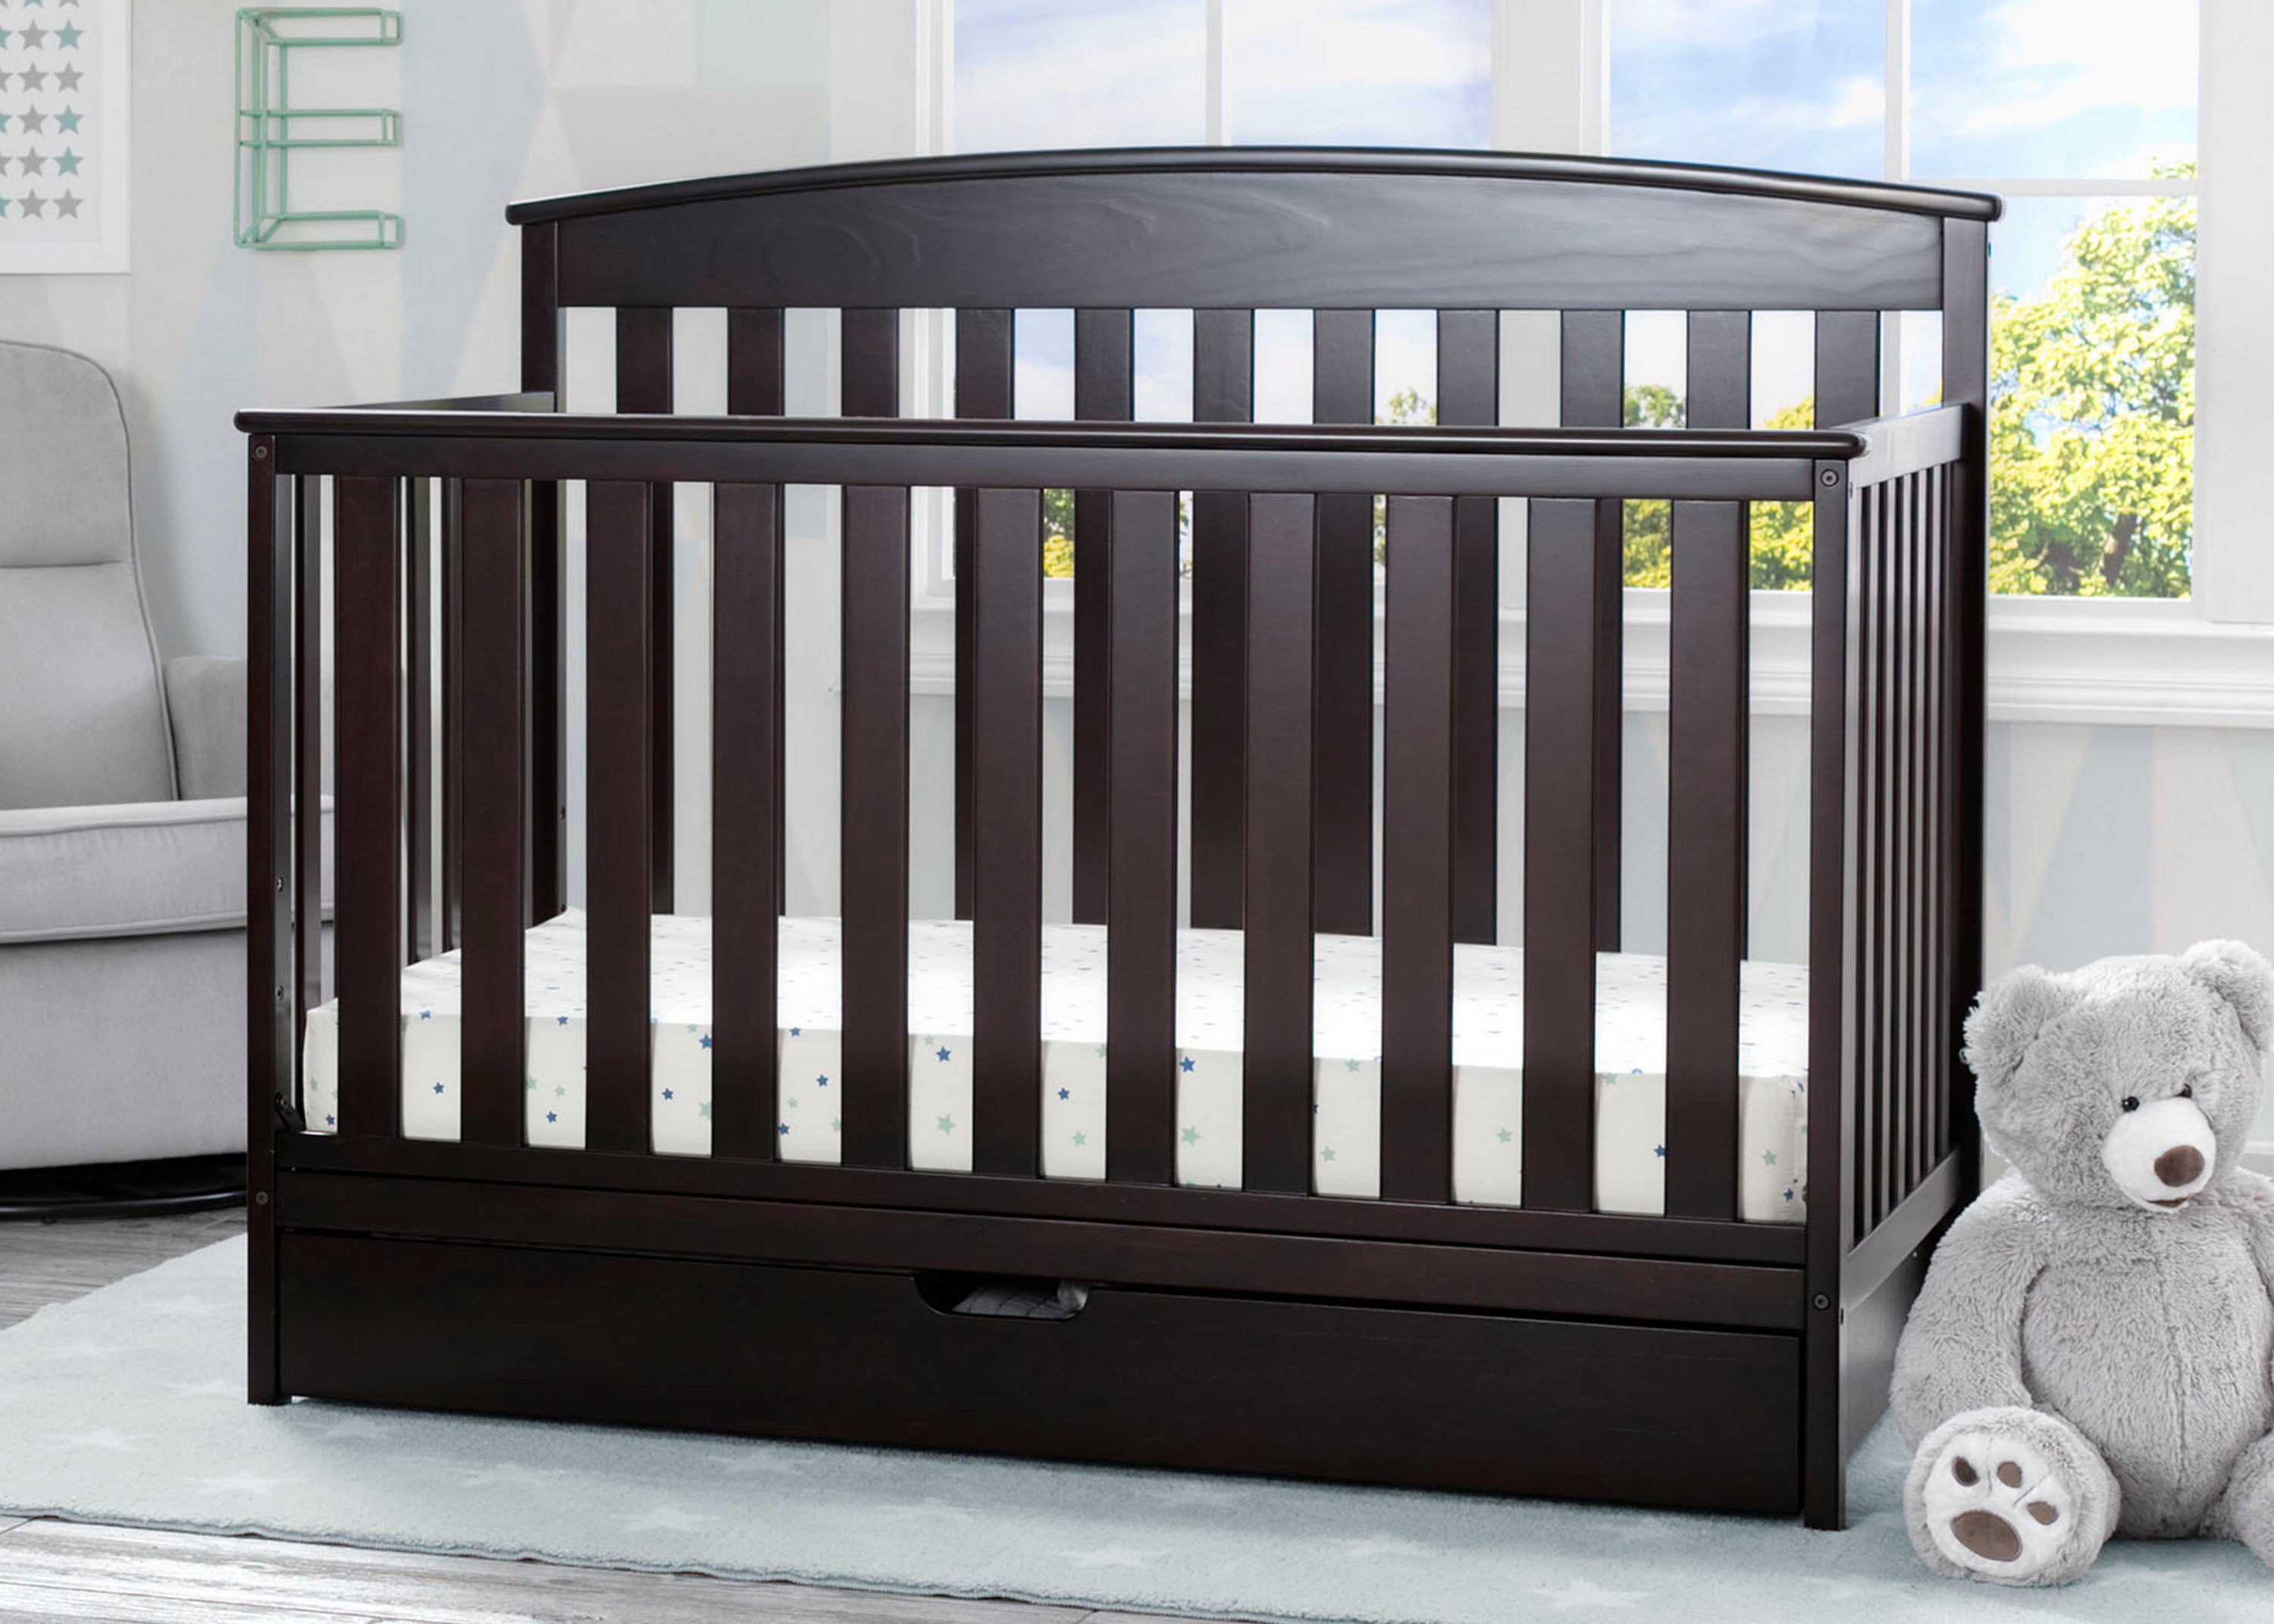 standard baby cot size